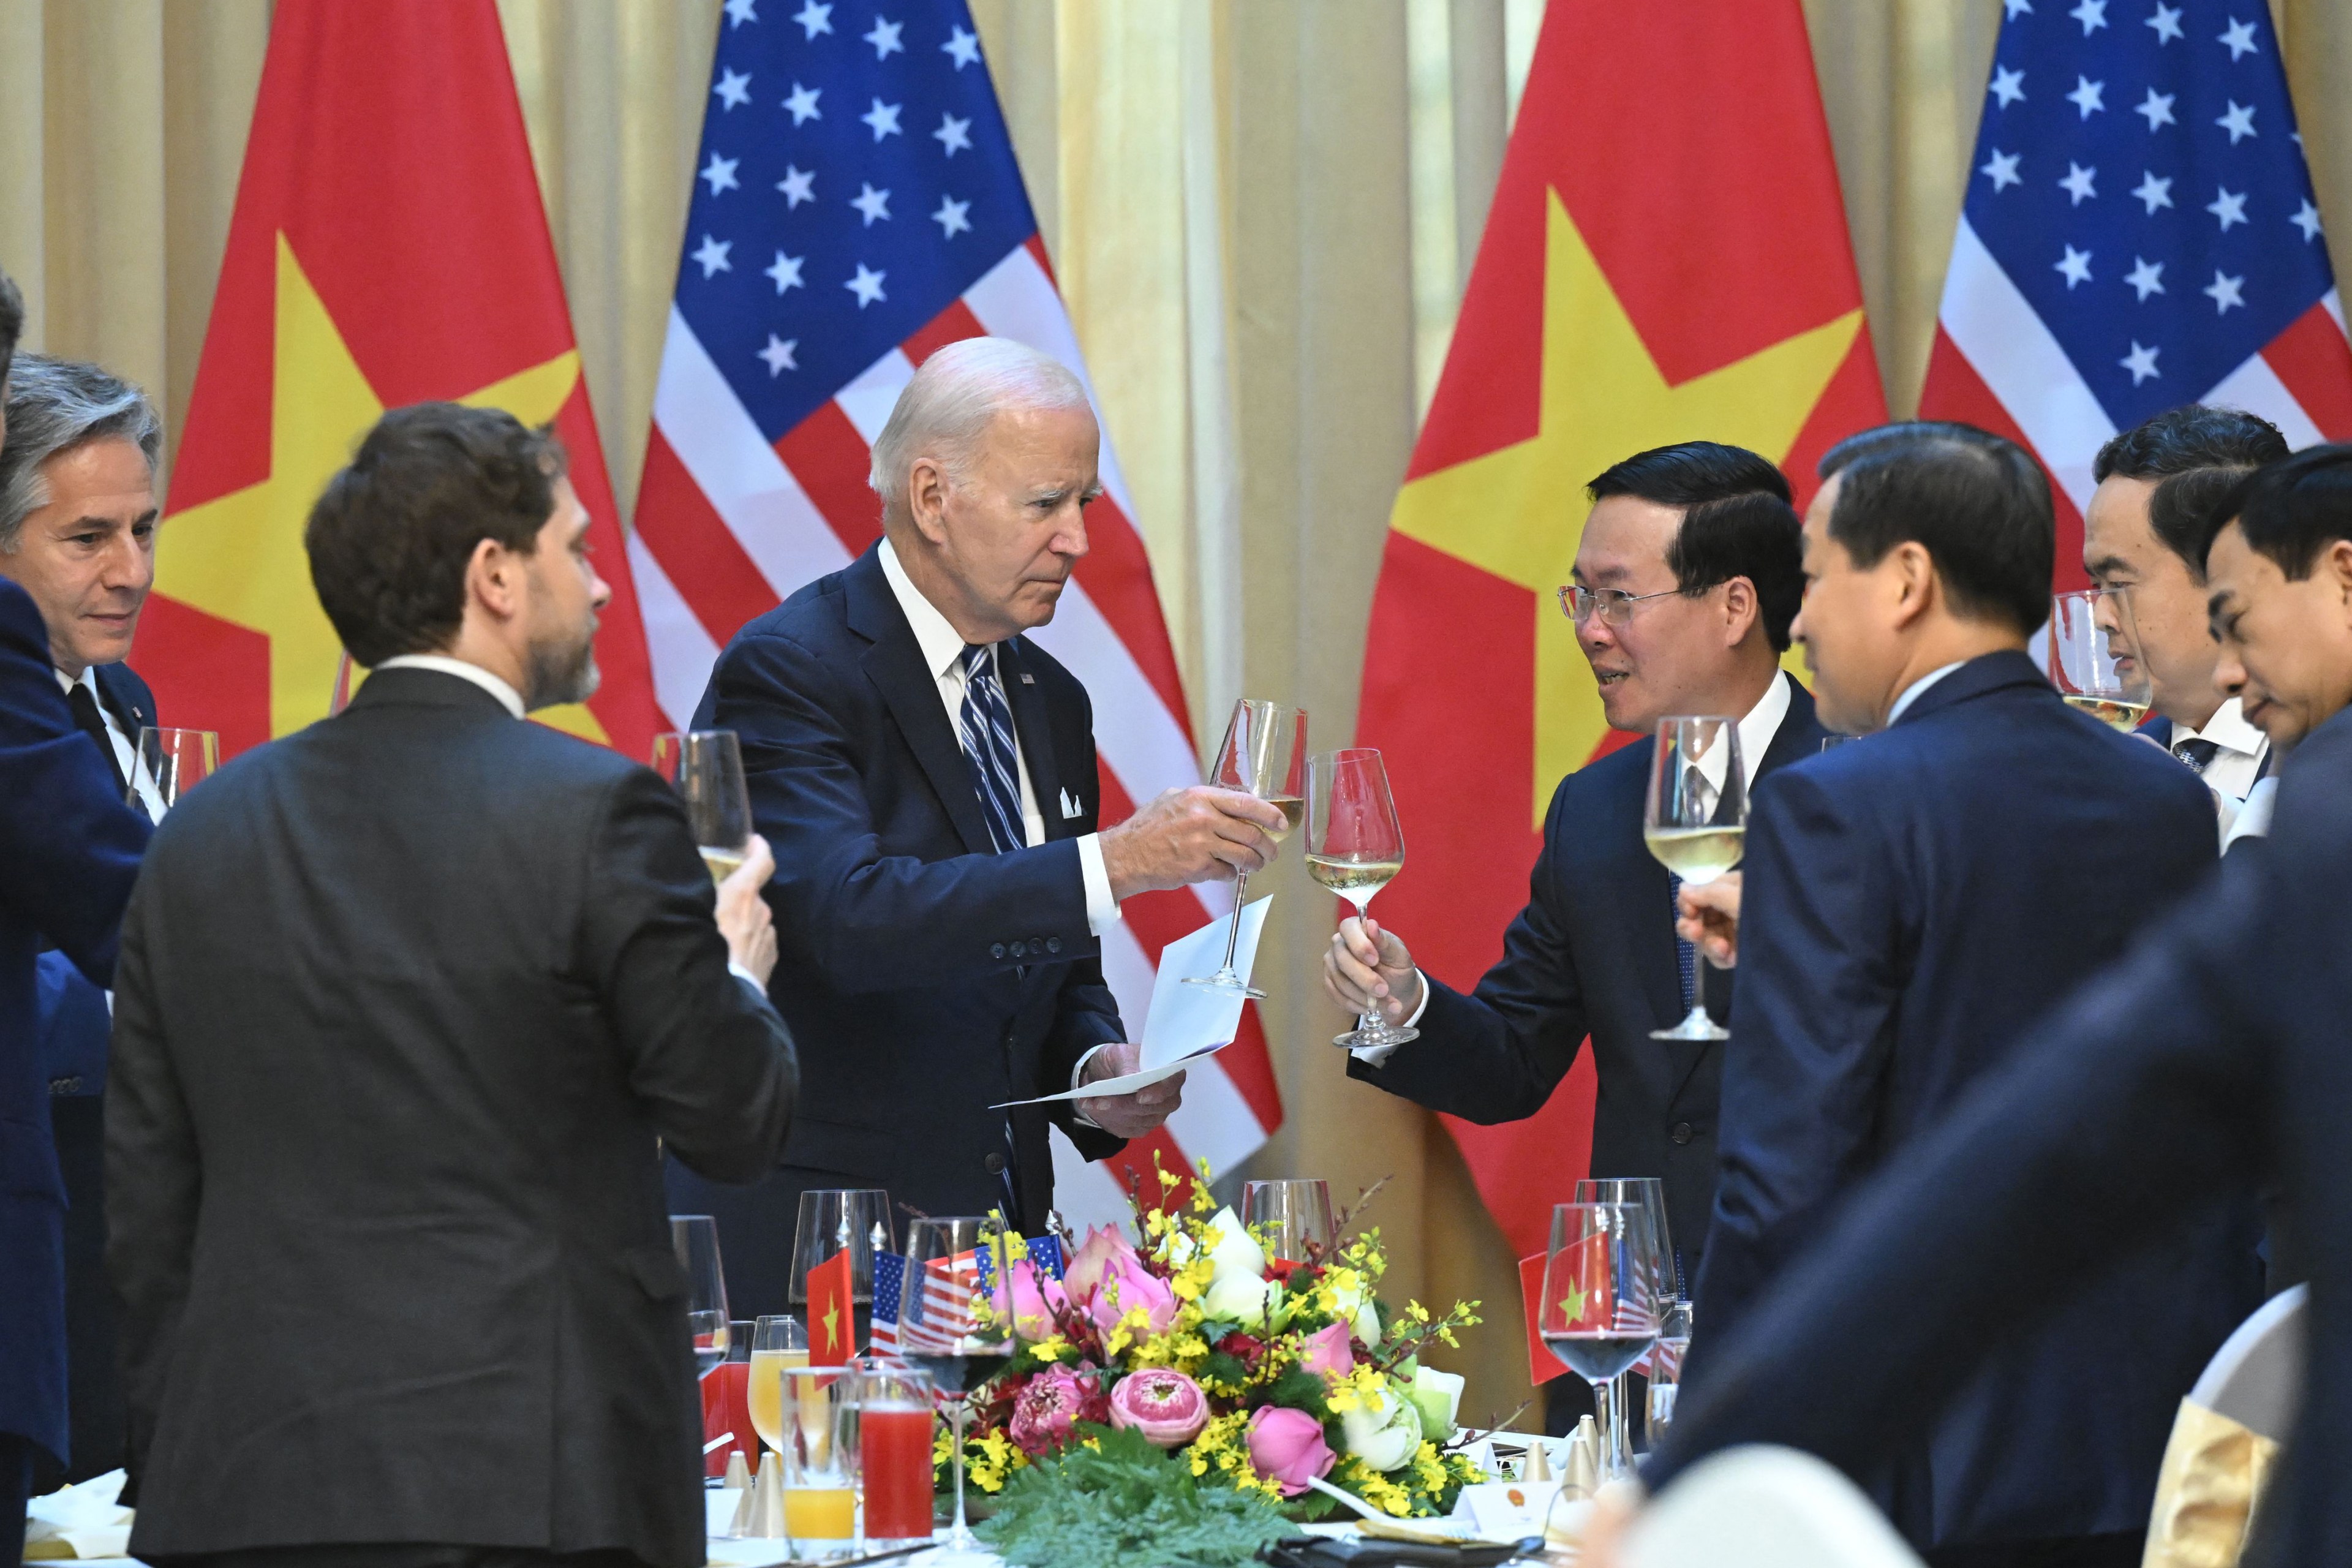 Surrounded by standing men in suits and 2 American flags and 2 Vietnam flag, US President Joe Biden stands in the center of the picture holding a glass of wine as he prepares to cheers with Vietnamese President Vo Van Thuong during a formal dinner setting.